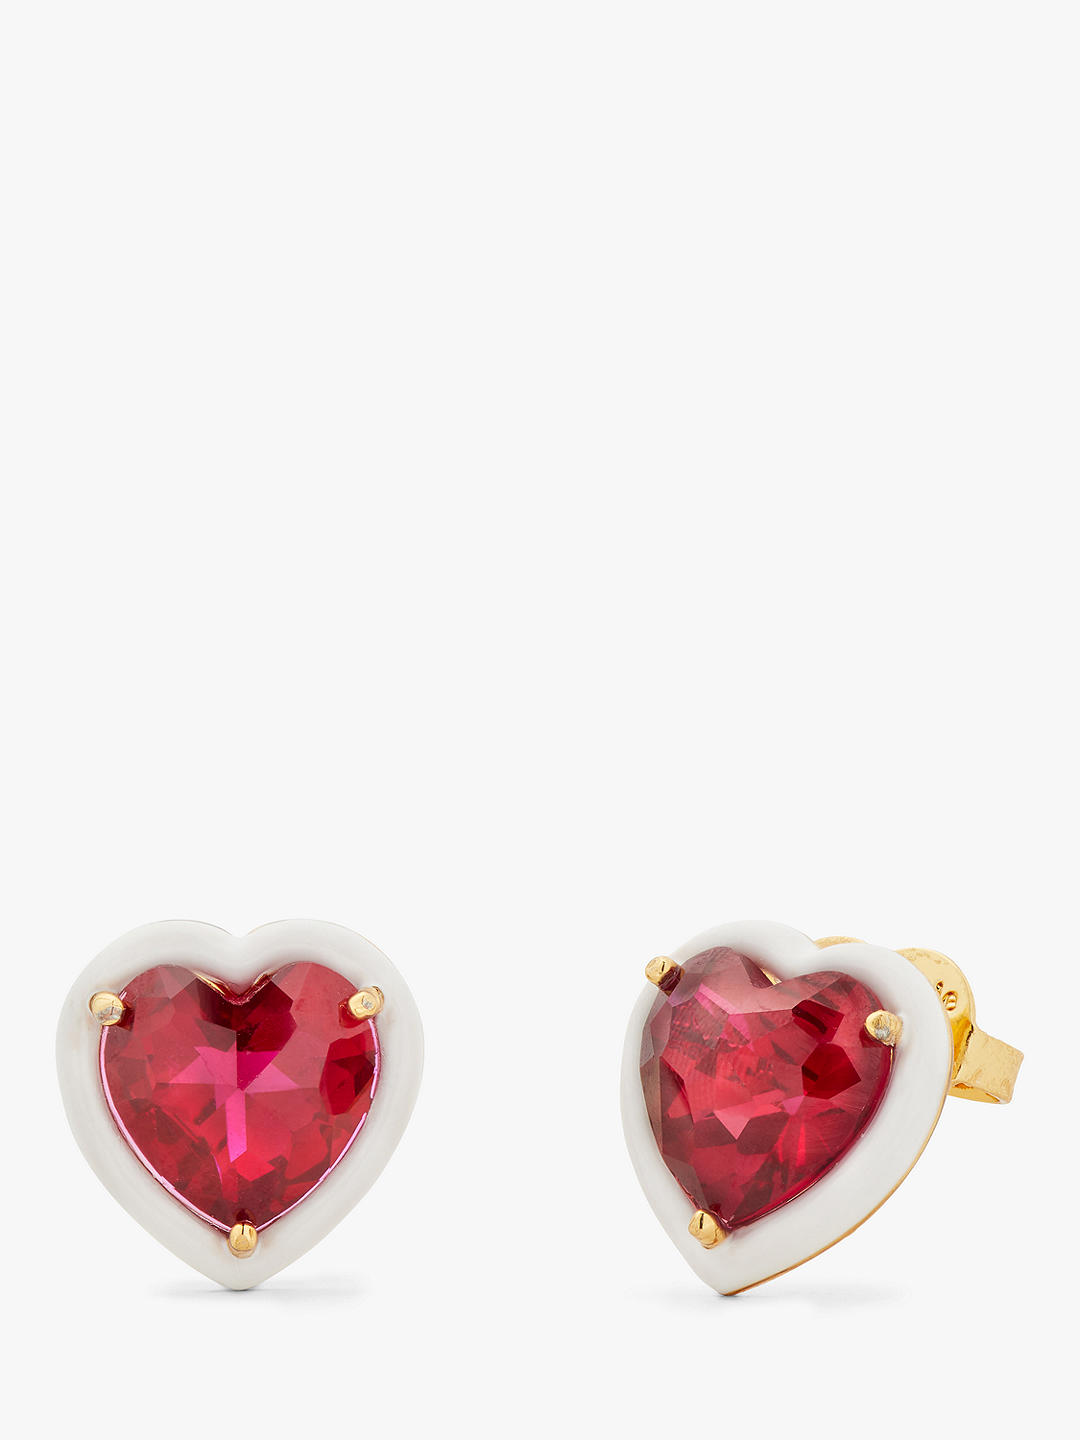 kate spade new york Red Cubic Zirconia and Resin Heart Earrings, Gold